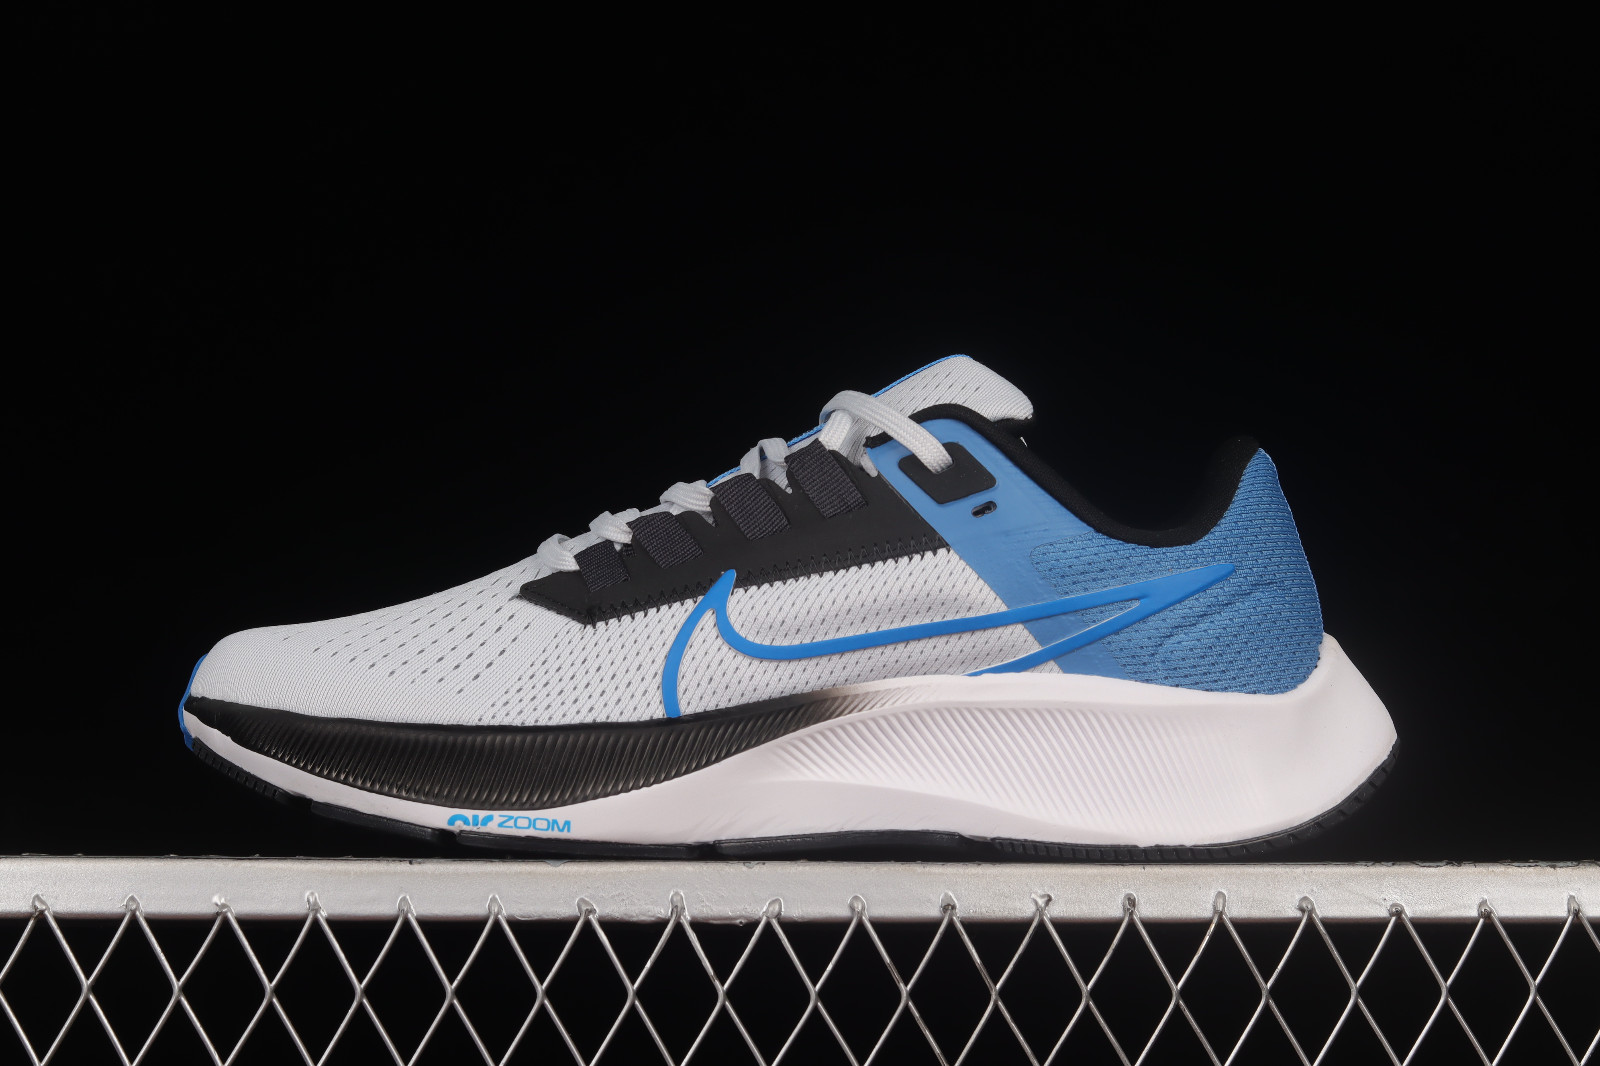 Buigen Stam Gloed MultiscaleconsultingShops - Nike Air Zoom Pegasus 38 Pure Platinum Photo  Blue CW7356 - 009 - nike air half cent silver coins for sale